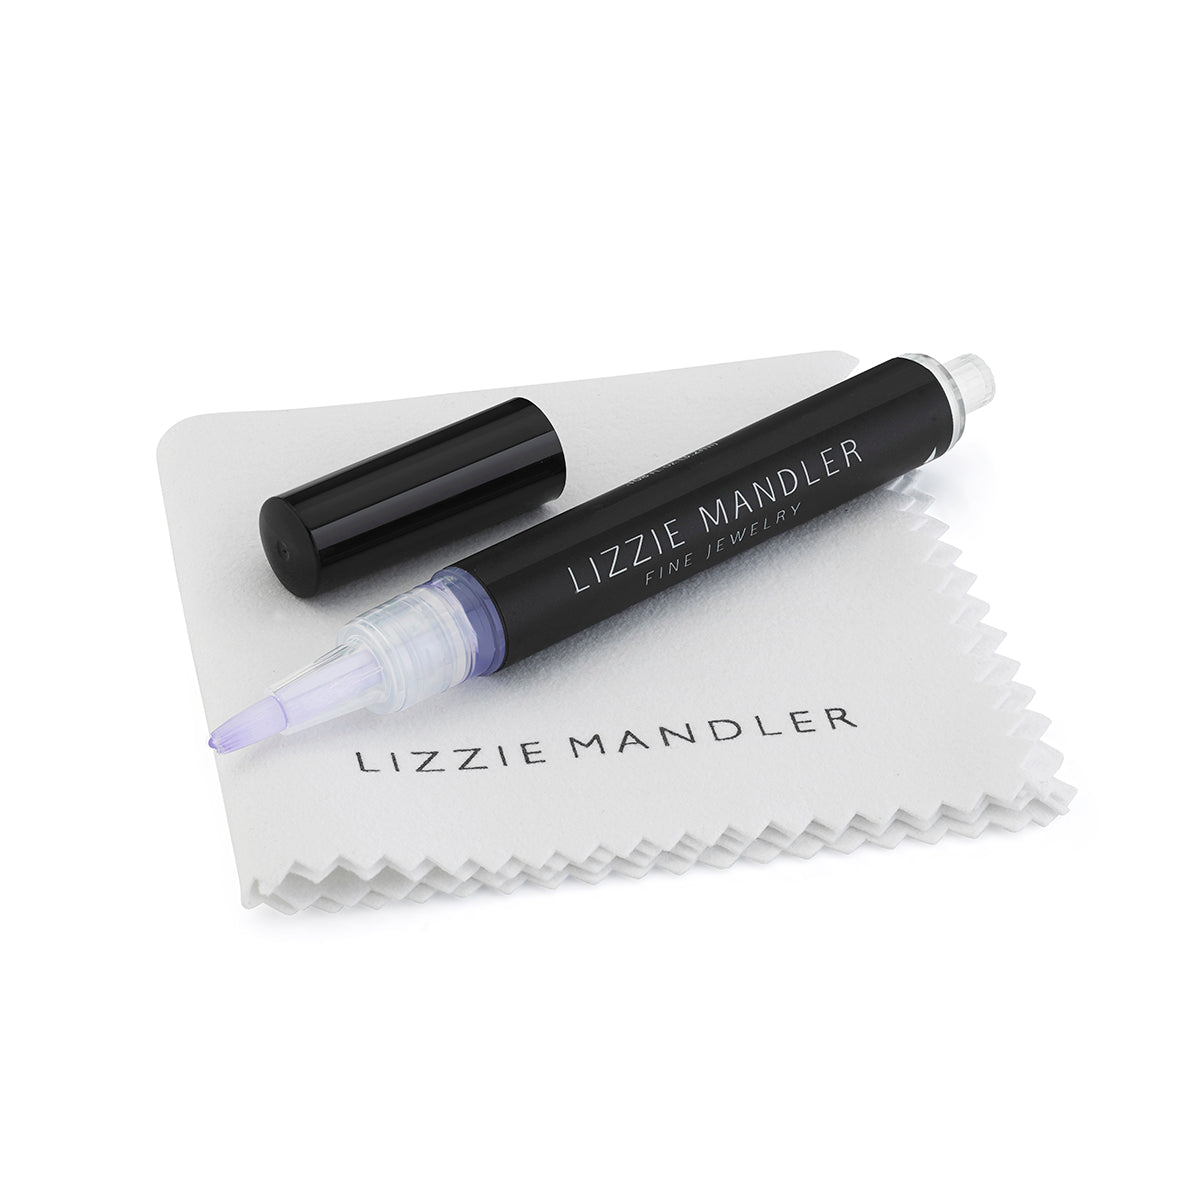 Jewelry Cleaning Pen - Lizzie Mandler